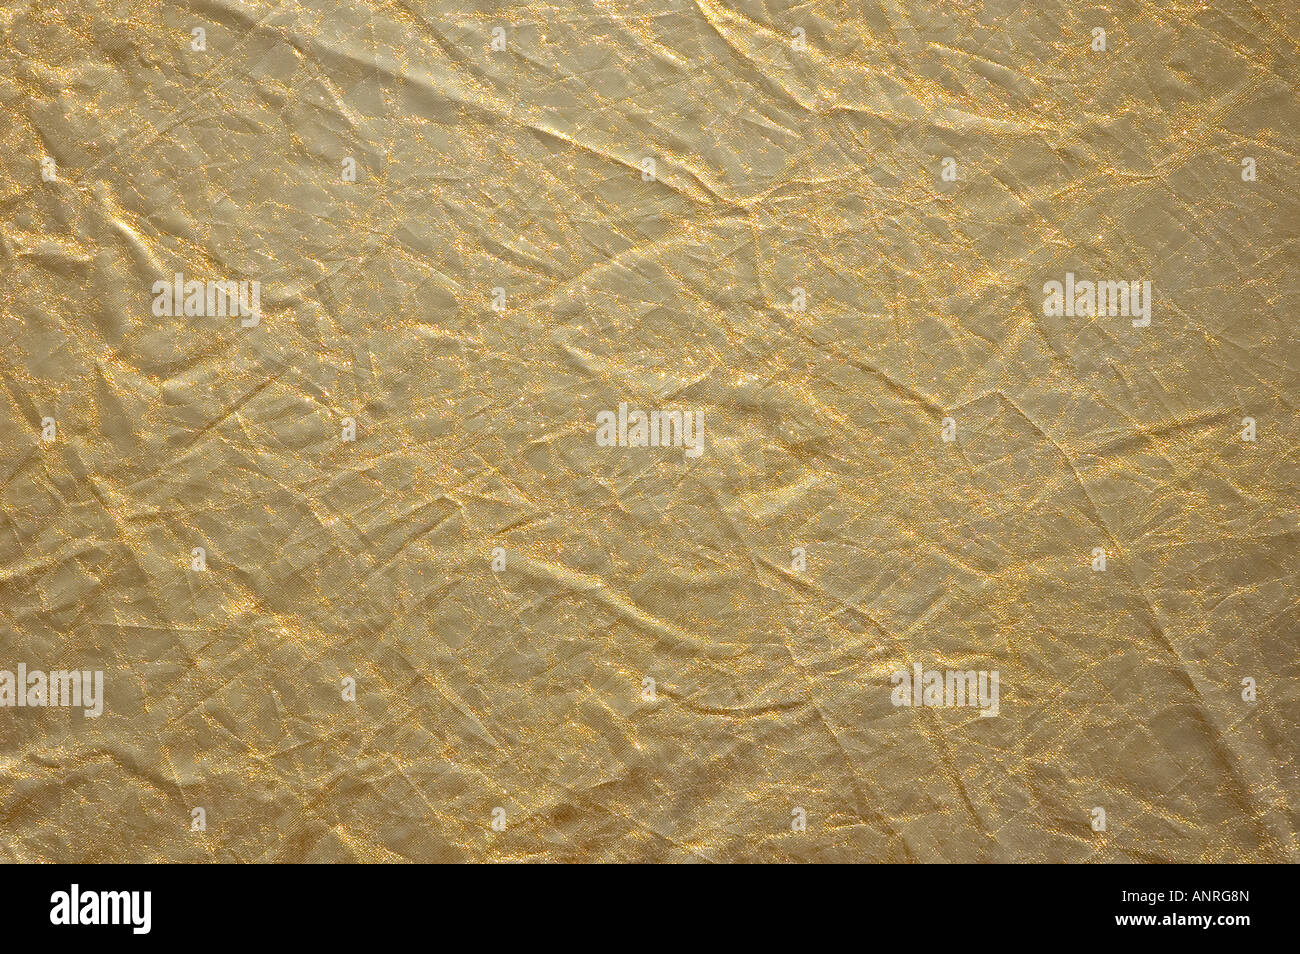 Shiny abstract golden background Stock Photo